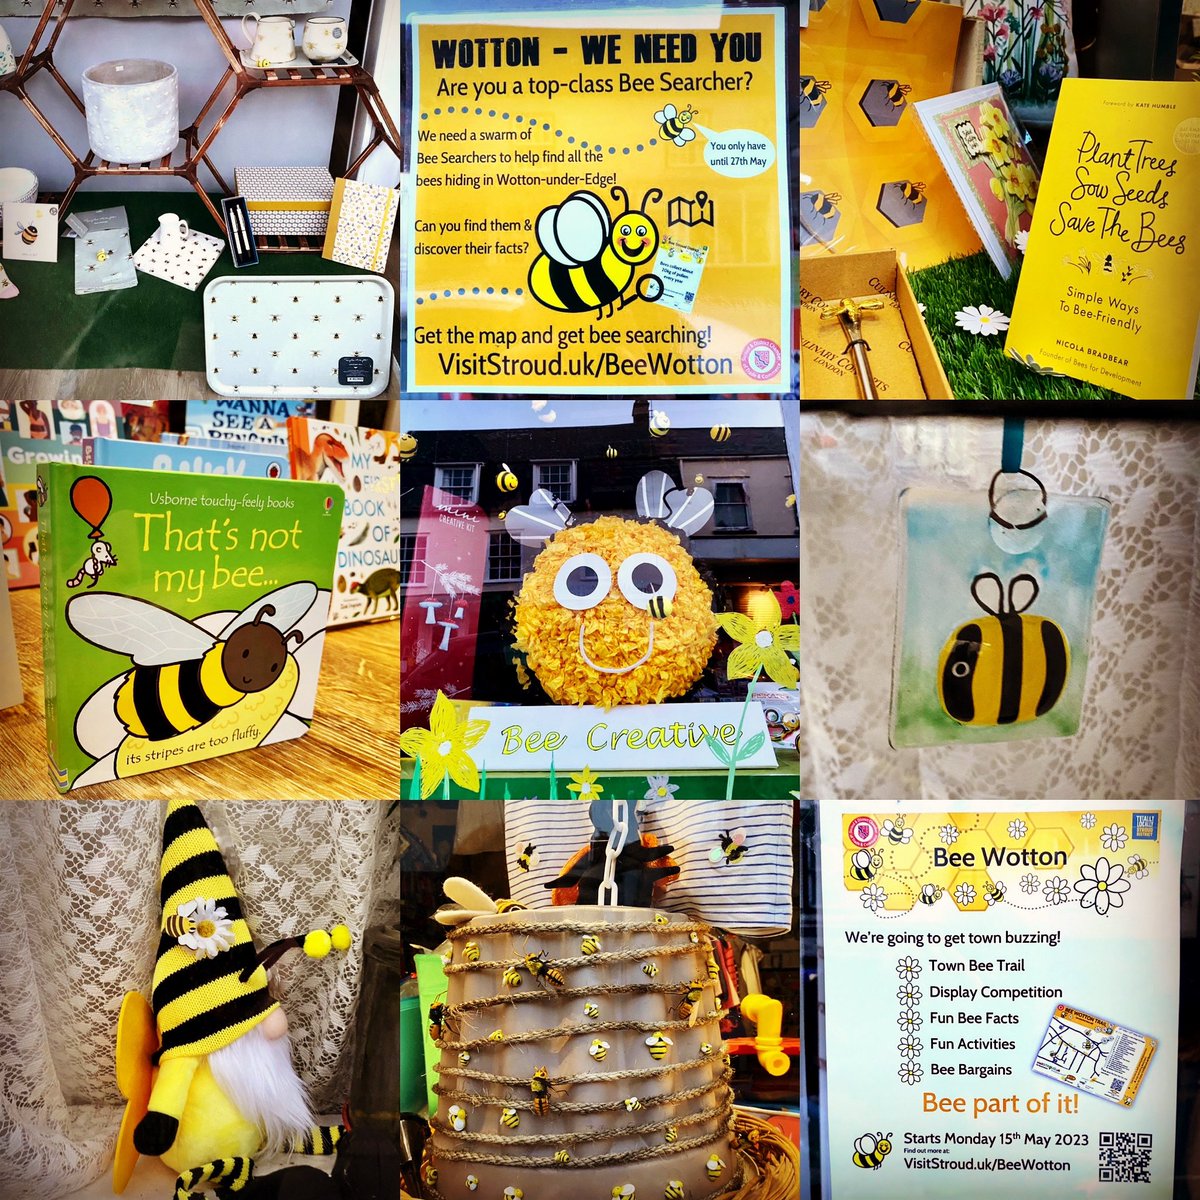 🐝 What a great Bee-Wotton show from our local businesses! Lots of great promotions & activities. Thanks to everyone who took part. Let’s keep shopping local to support the high street all year round.
#ShopLocal #ThinkLocalFirst #BeeStroudDistrict 
visitstroud.uk/beewotton